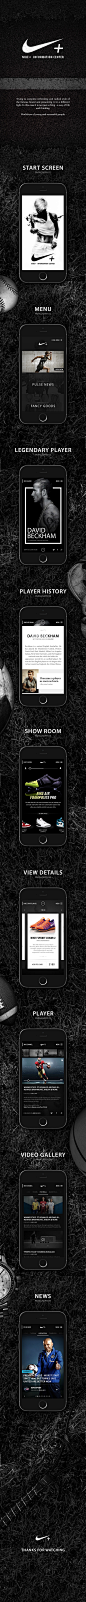 Nike. New Look & Concept by Alisa